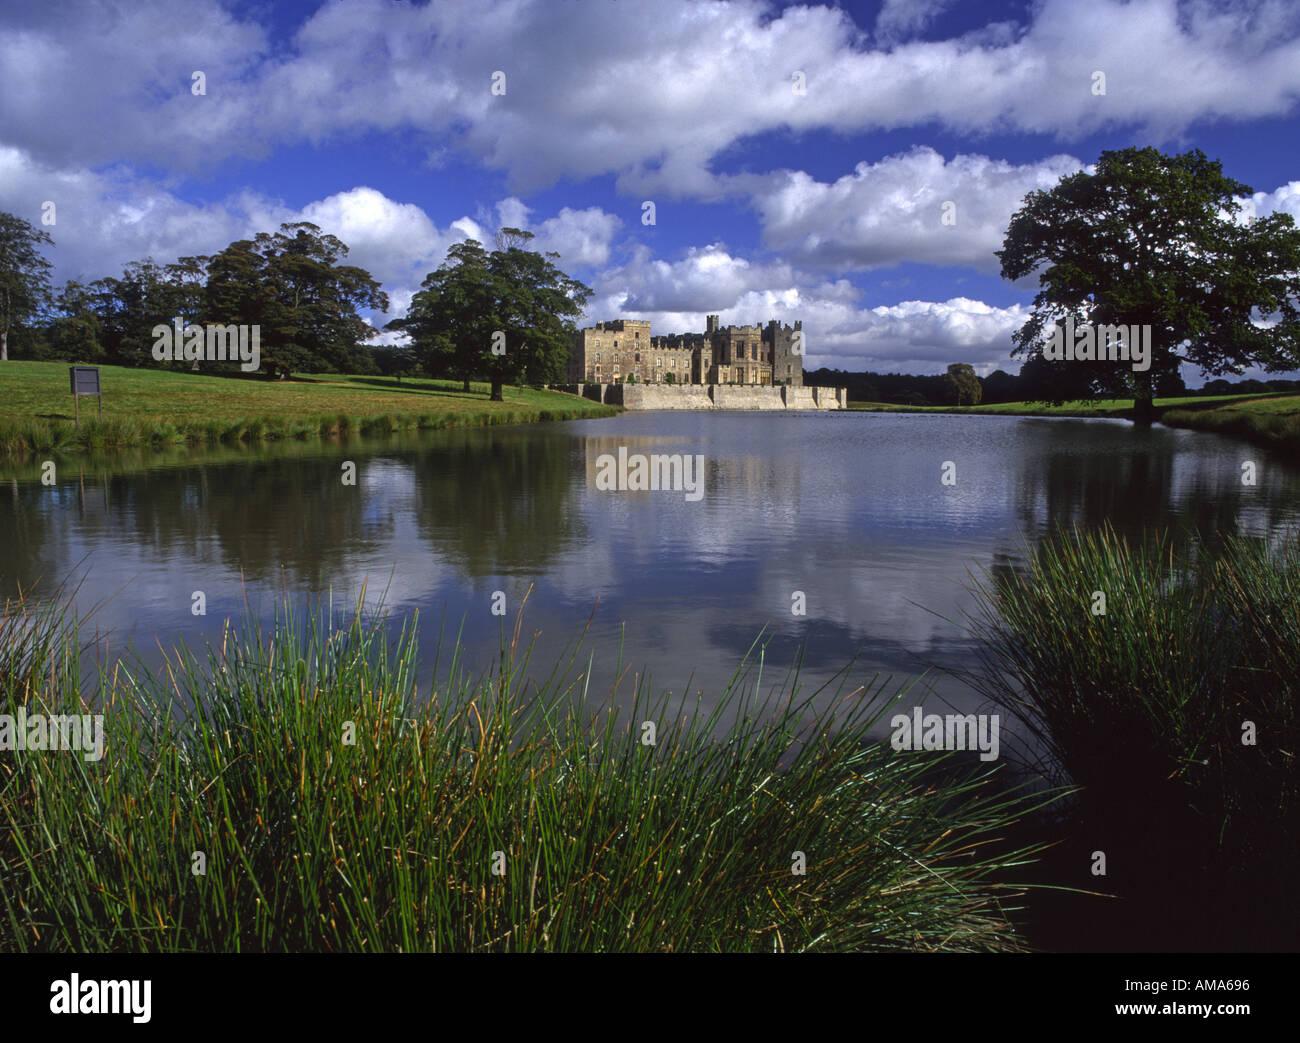 Raby Castle et le lac Staindrop County Durham Angleterre Banque D'Images